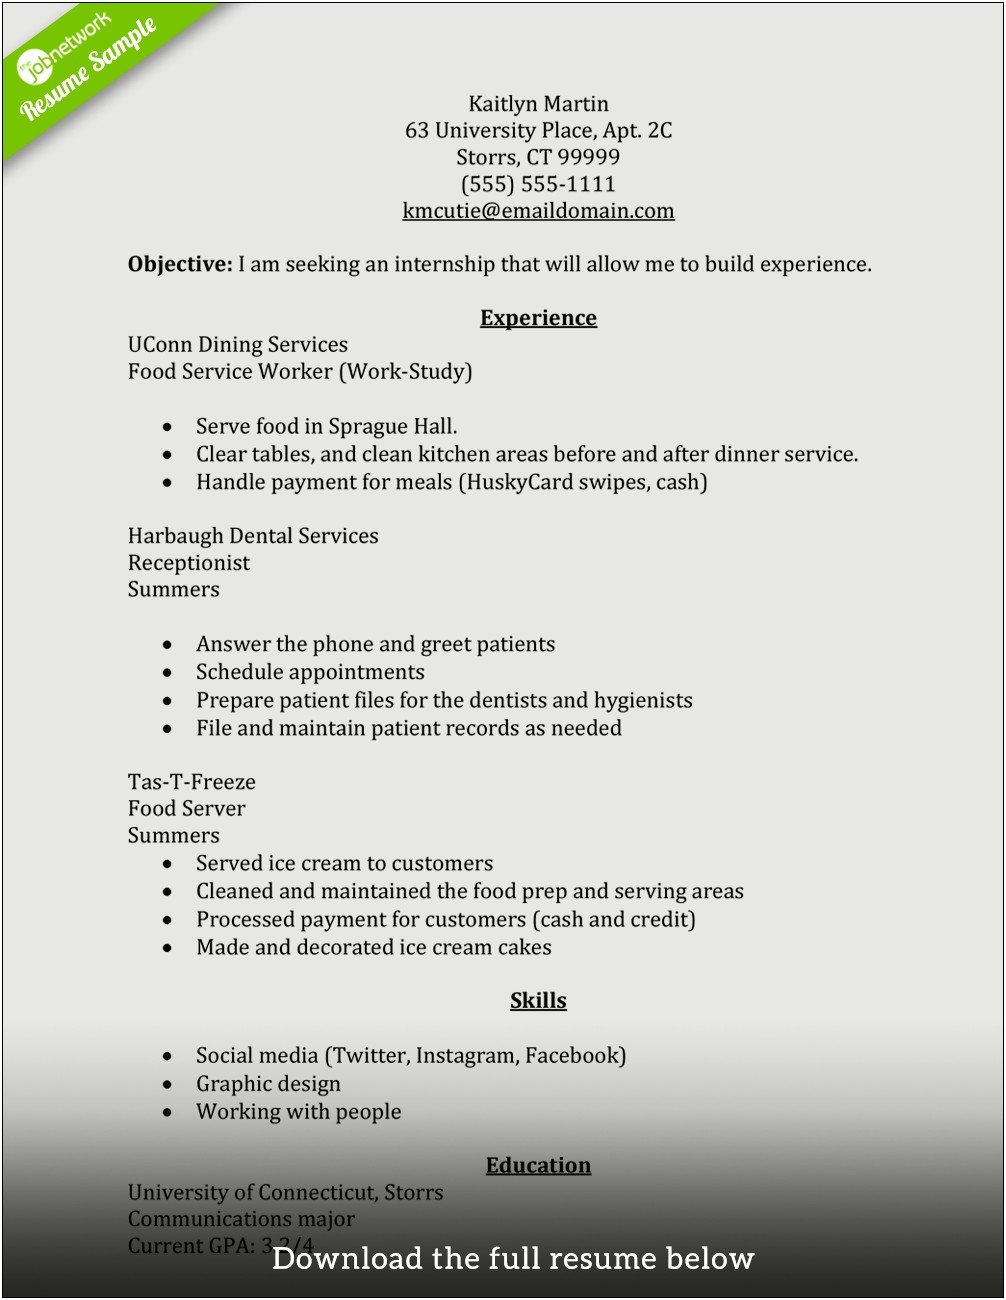 Sample Resume With Current Work Experience